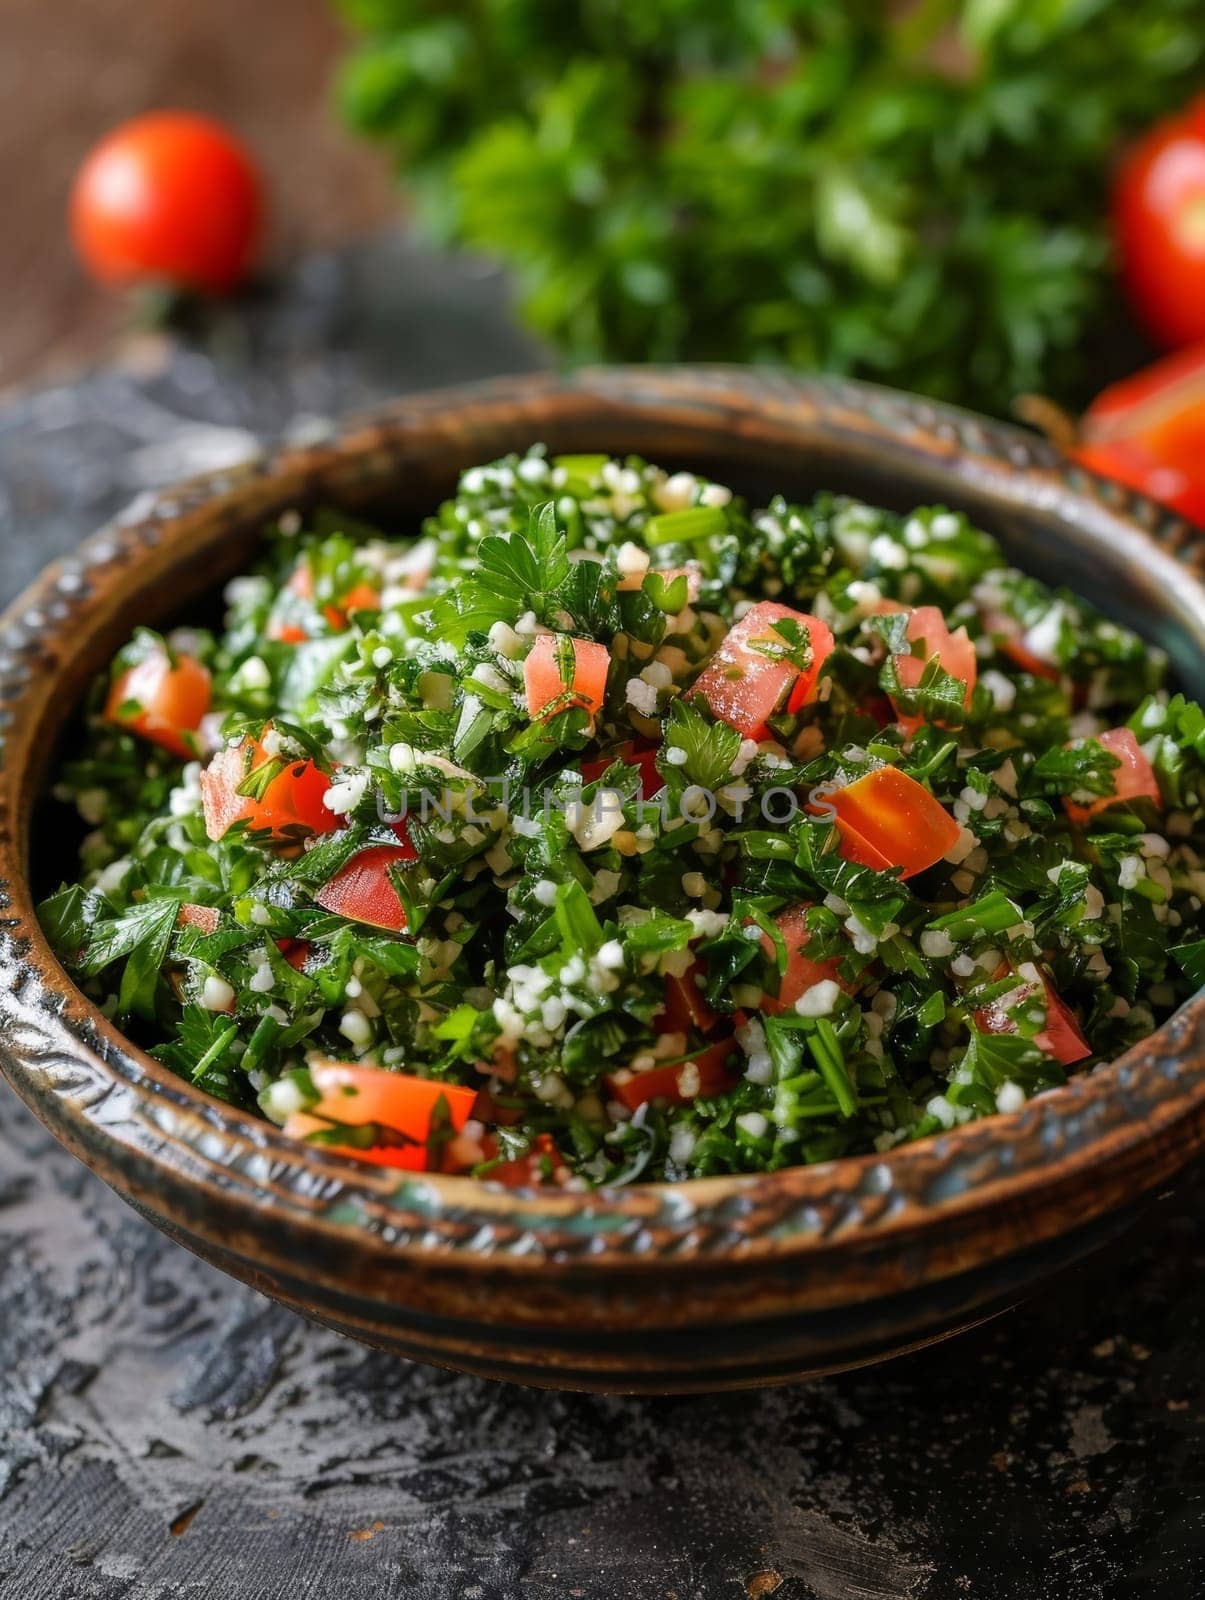 A vibrant and fresh Lebanese tabbouleh salad, featuring finely chopped parsley, ripe tomatoes, and nutty bulgur wheat, presented in a small bowl for a healthy and authentic Middle Eastern culinary